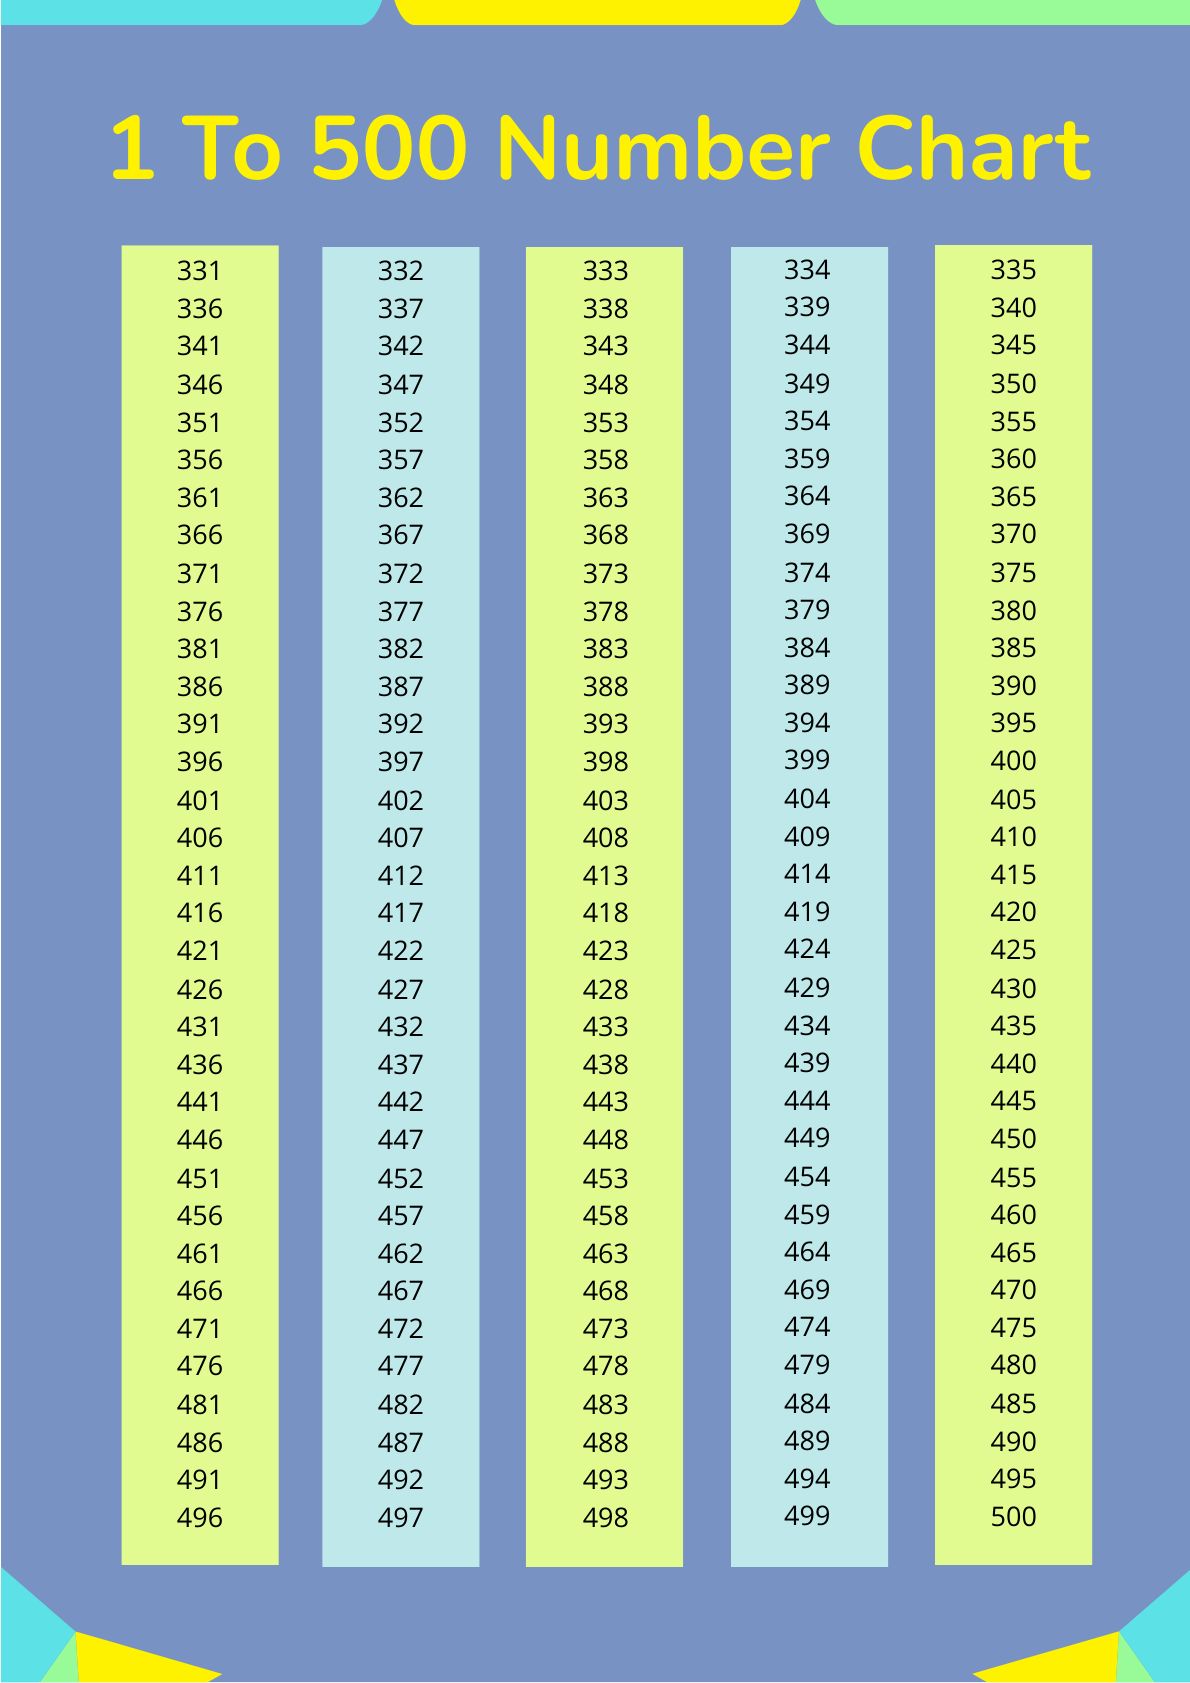 1 To 500 Number Chart